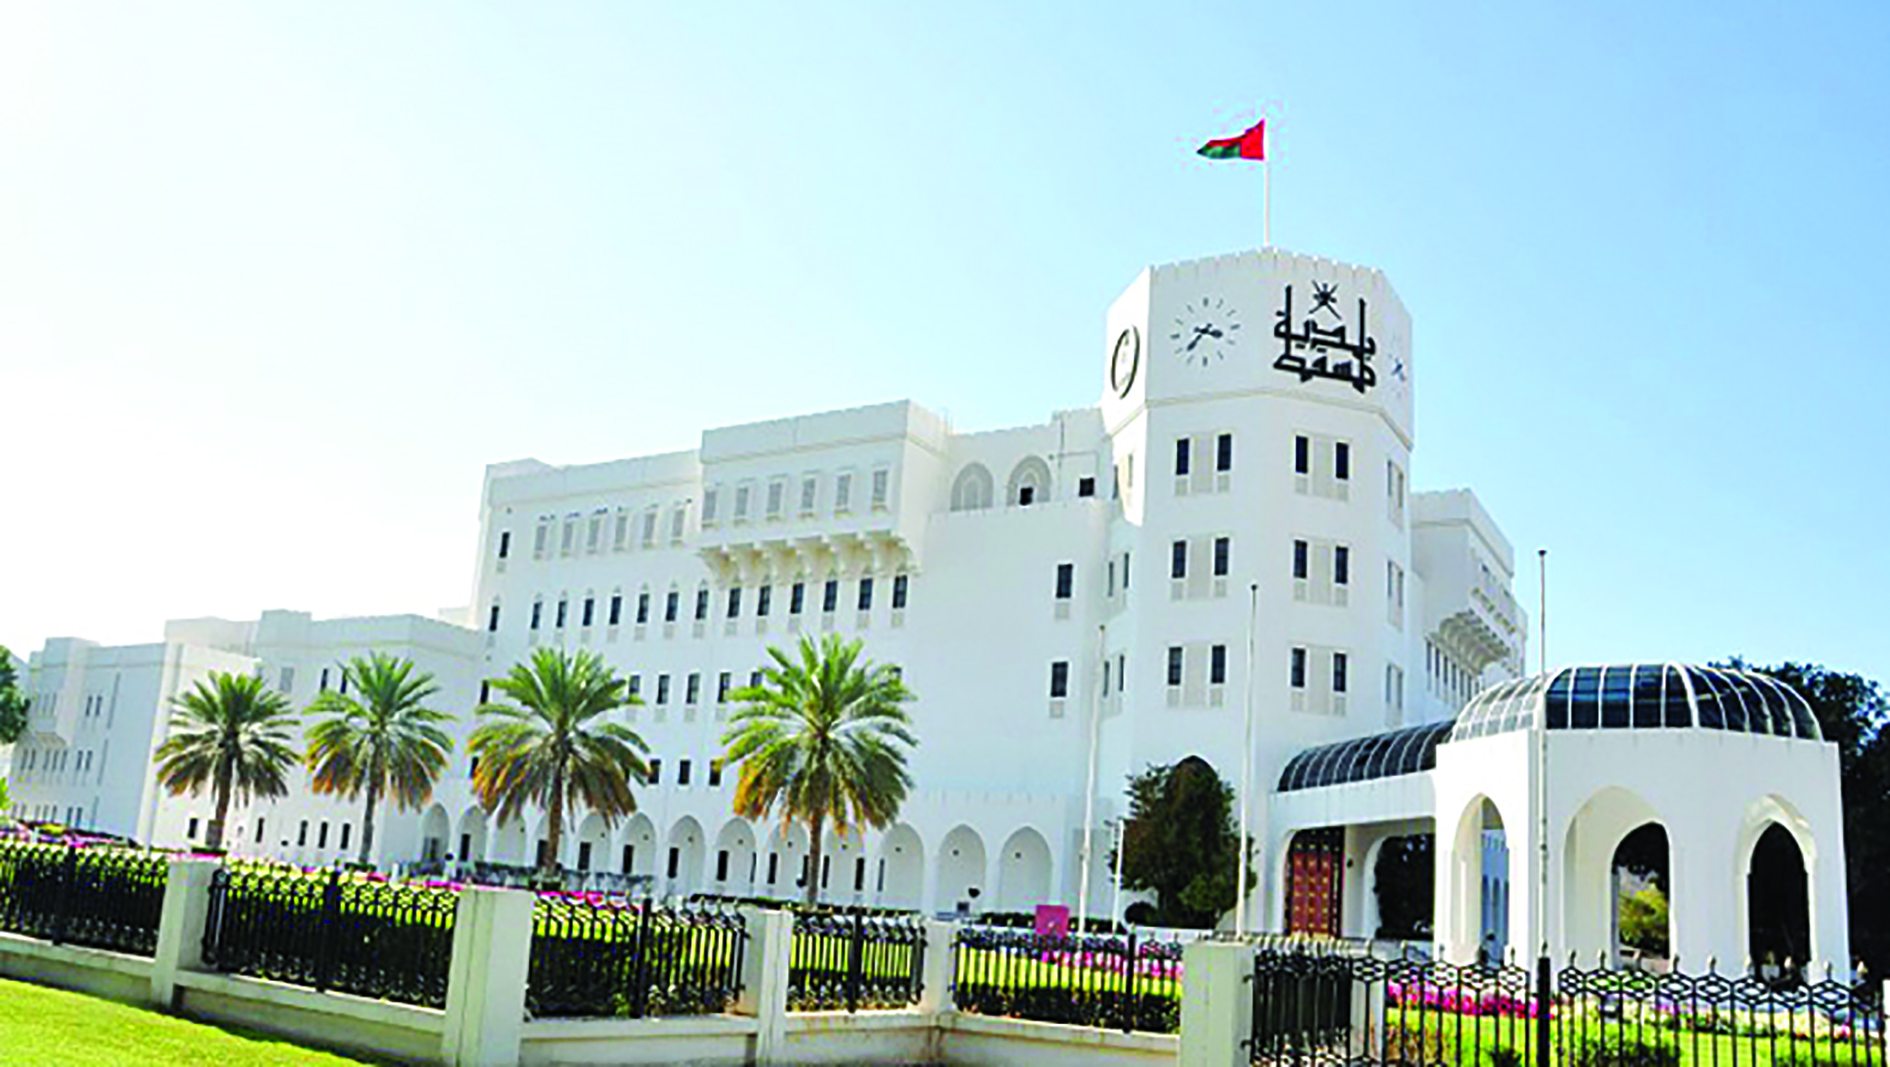 Avoid placing unauthorised adverts in public places: Muscat Municipality